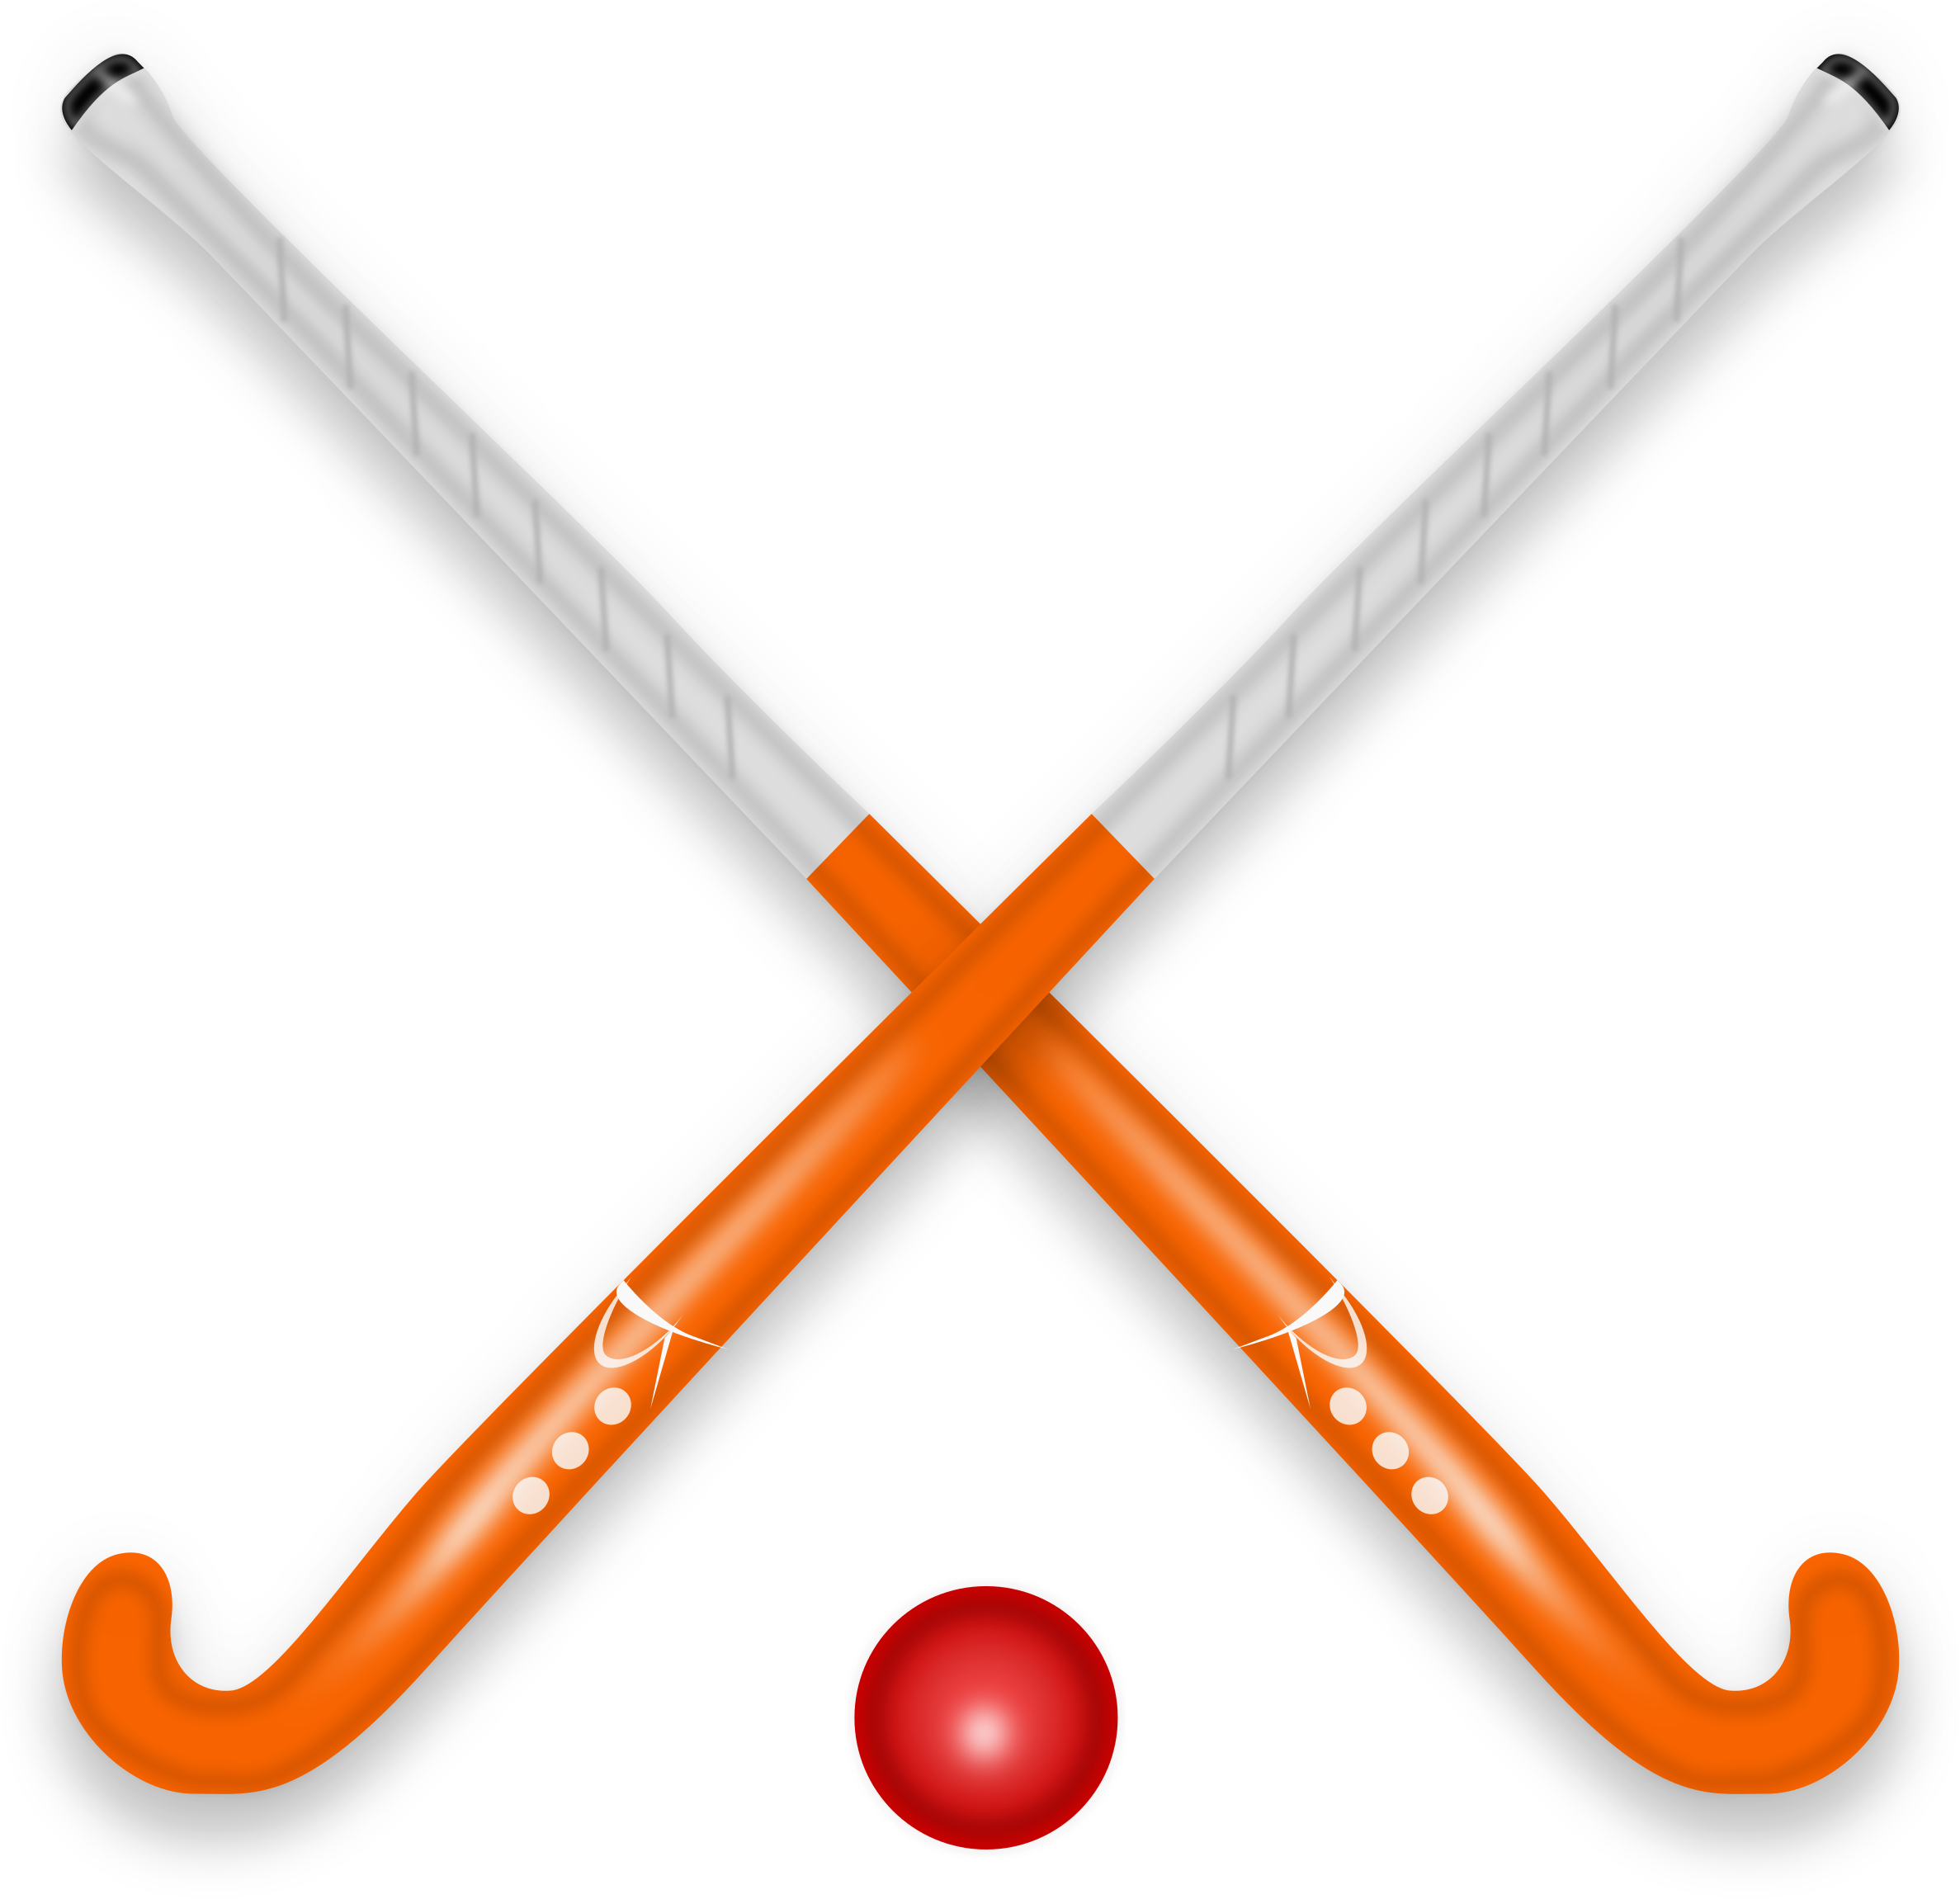 Two Crossed Hockey Sticks And A Red Ball